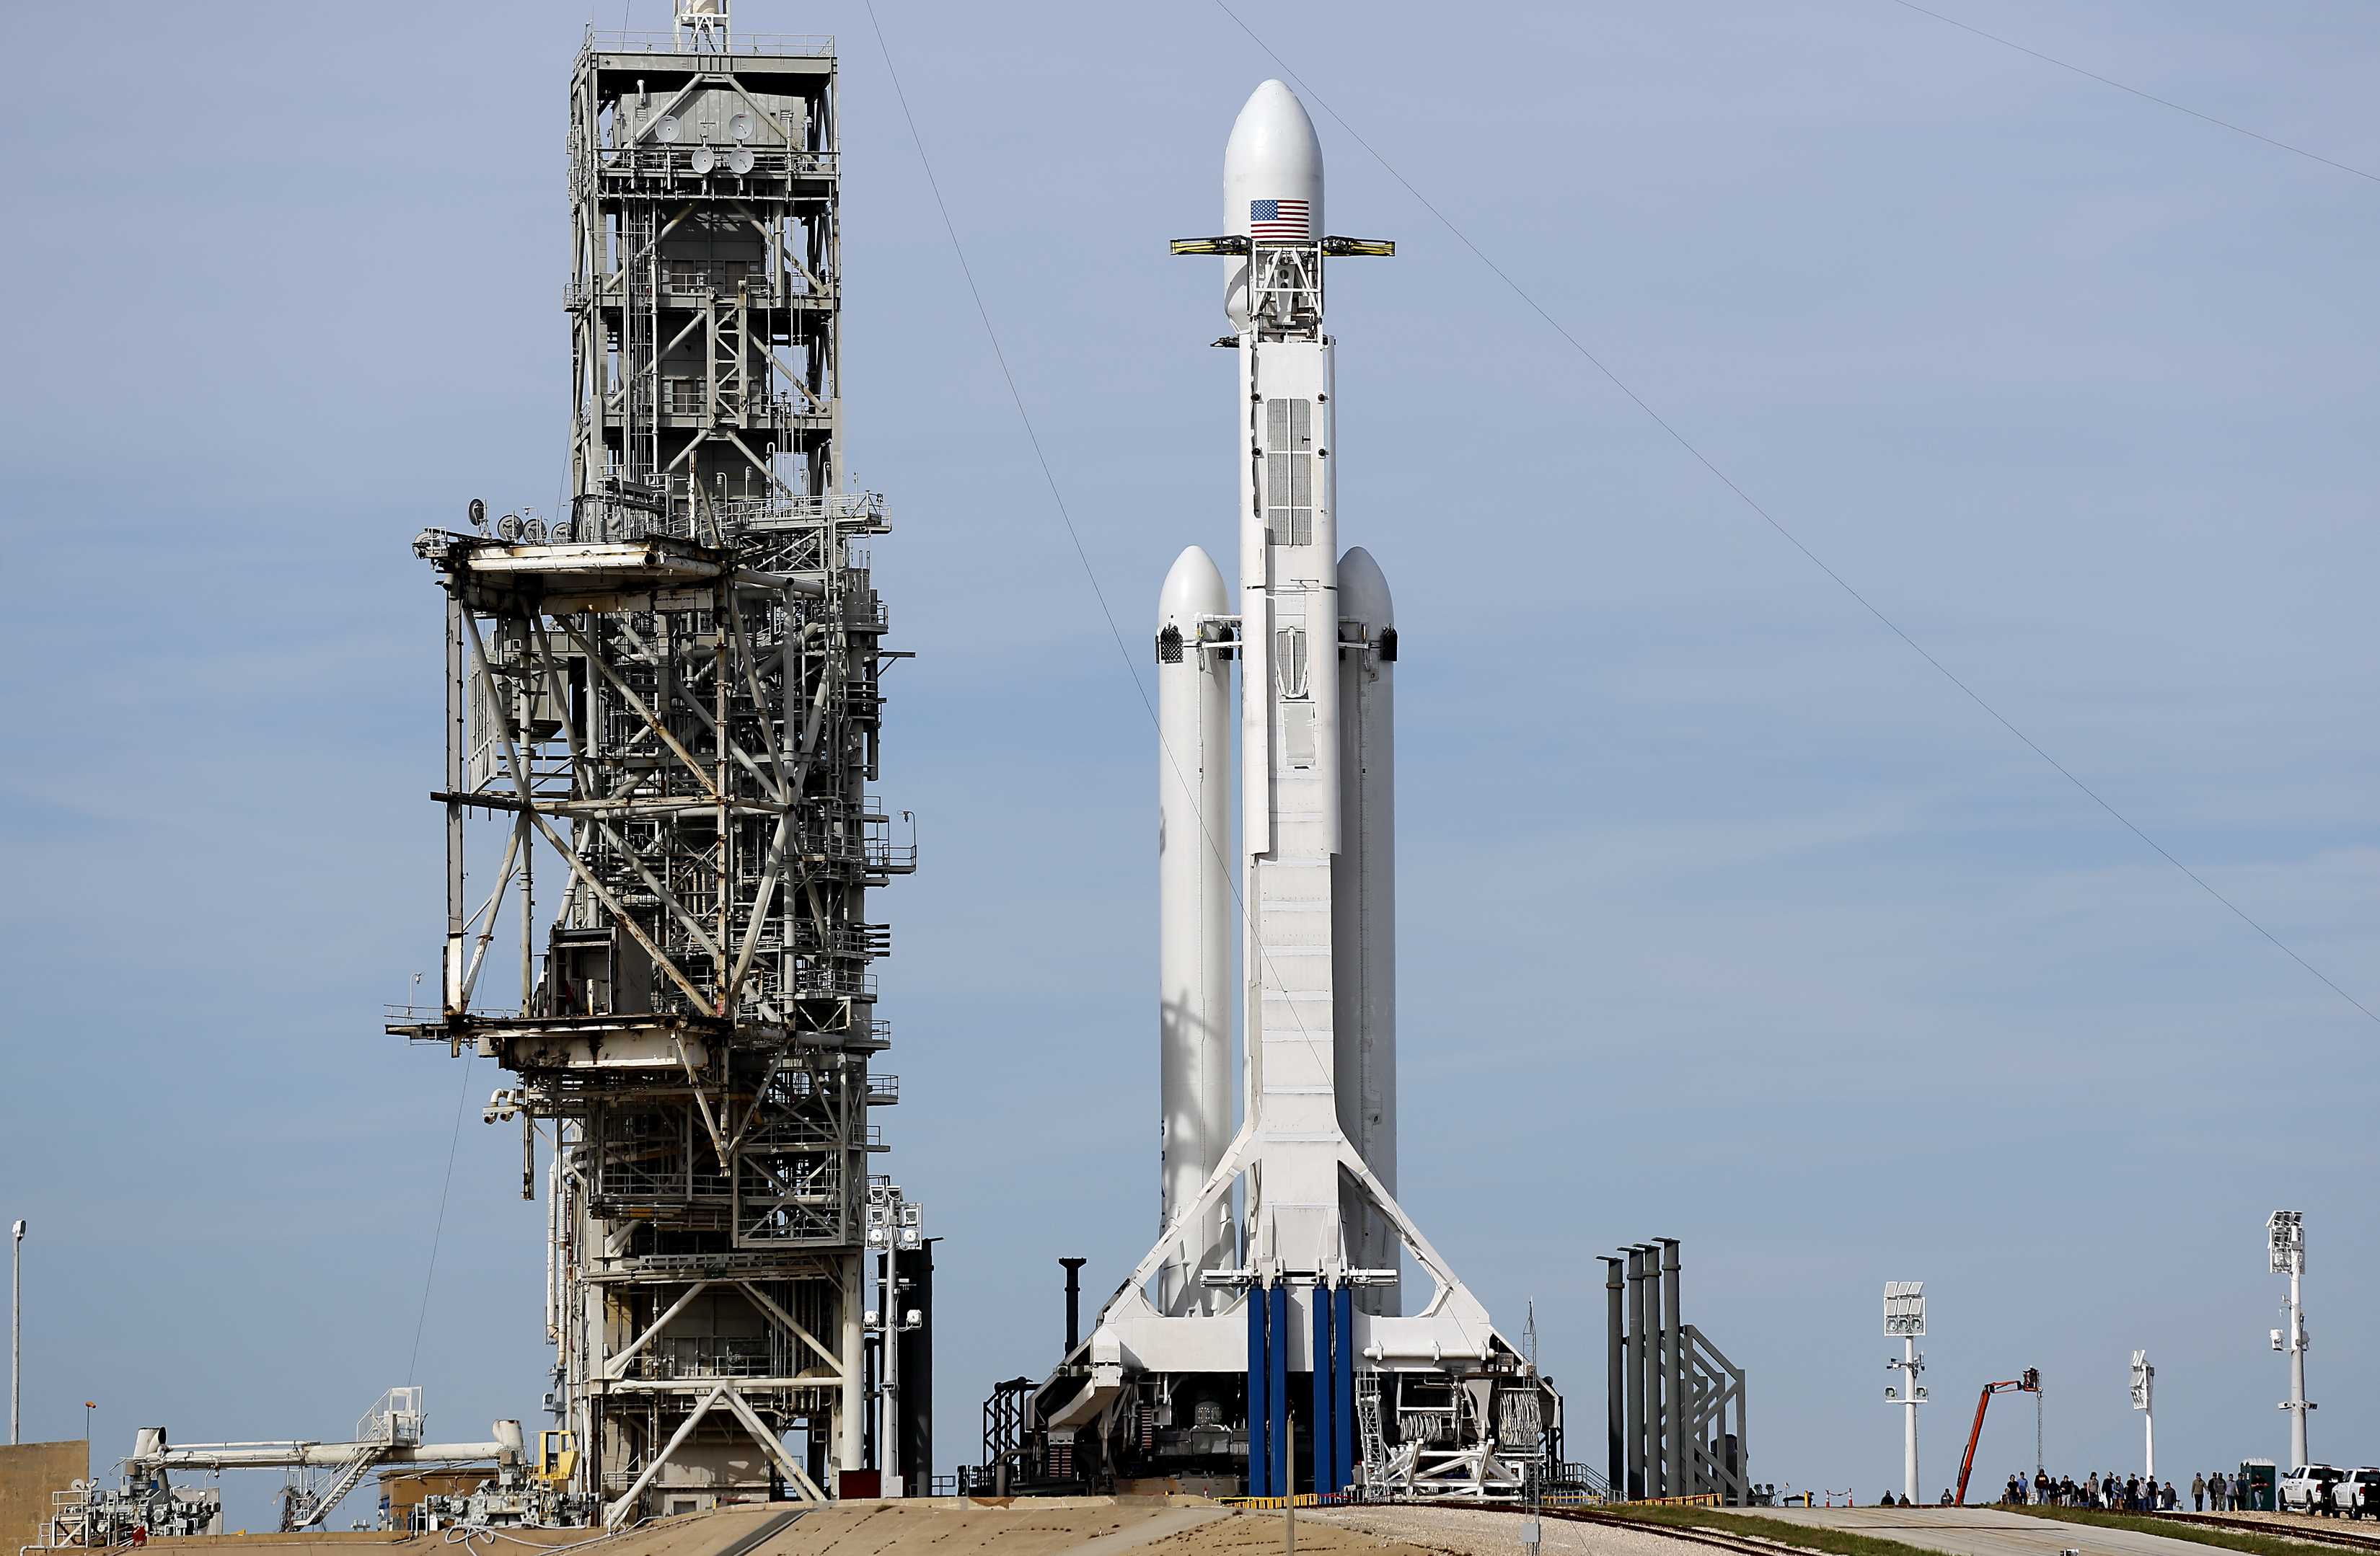 Satellite launch from California is delayed